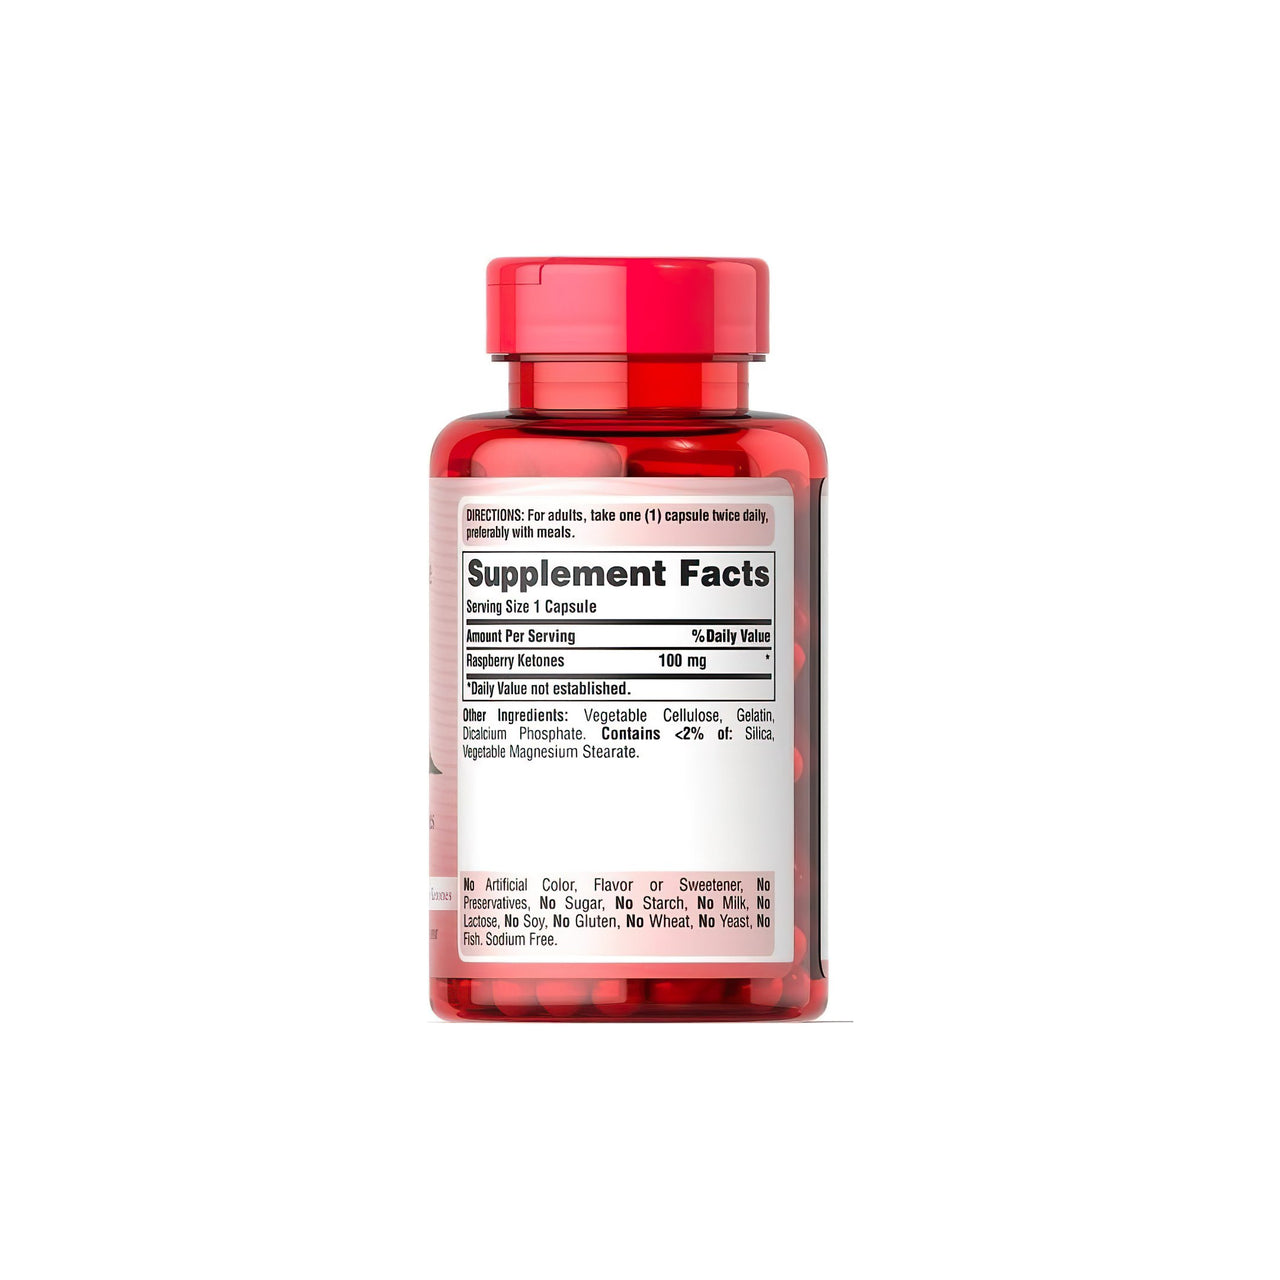 A bottle of Puritan's Pride Raspberry Ketones 100 mg 120 Rapid Realase capsules on a white background.